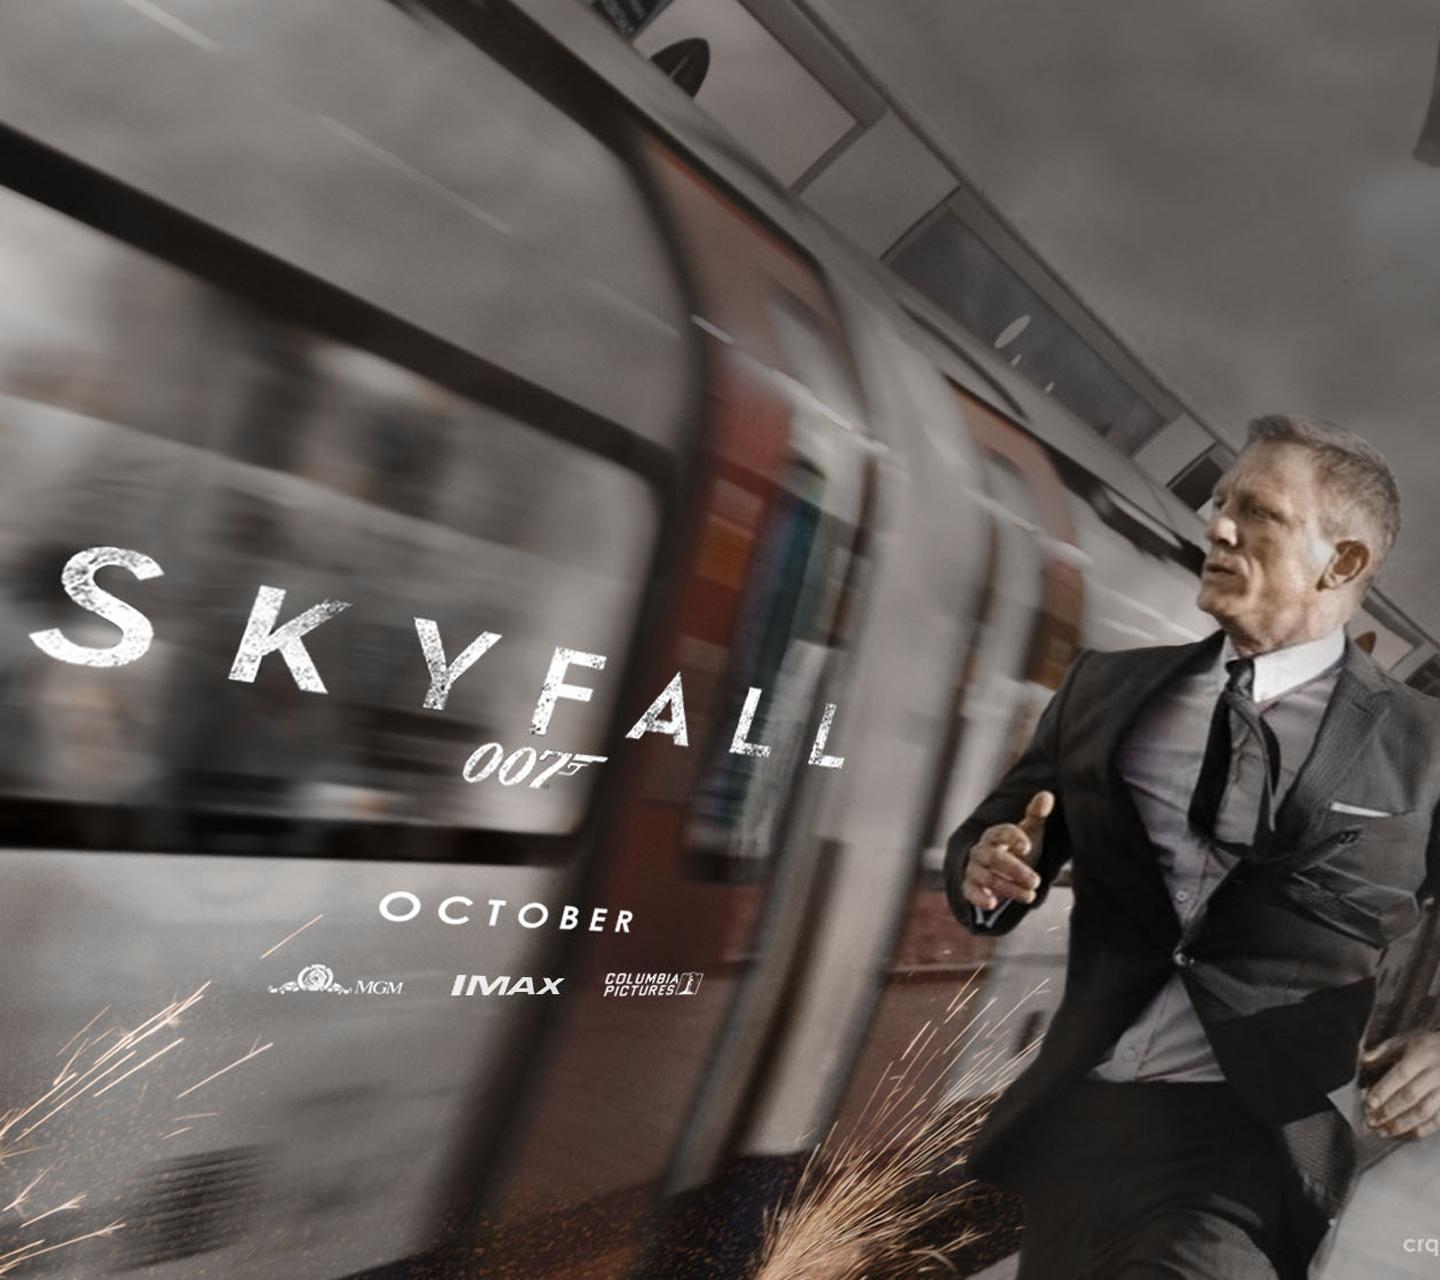 Skyfall download the new version for iphone